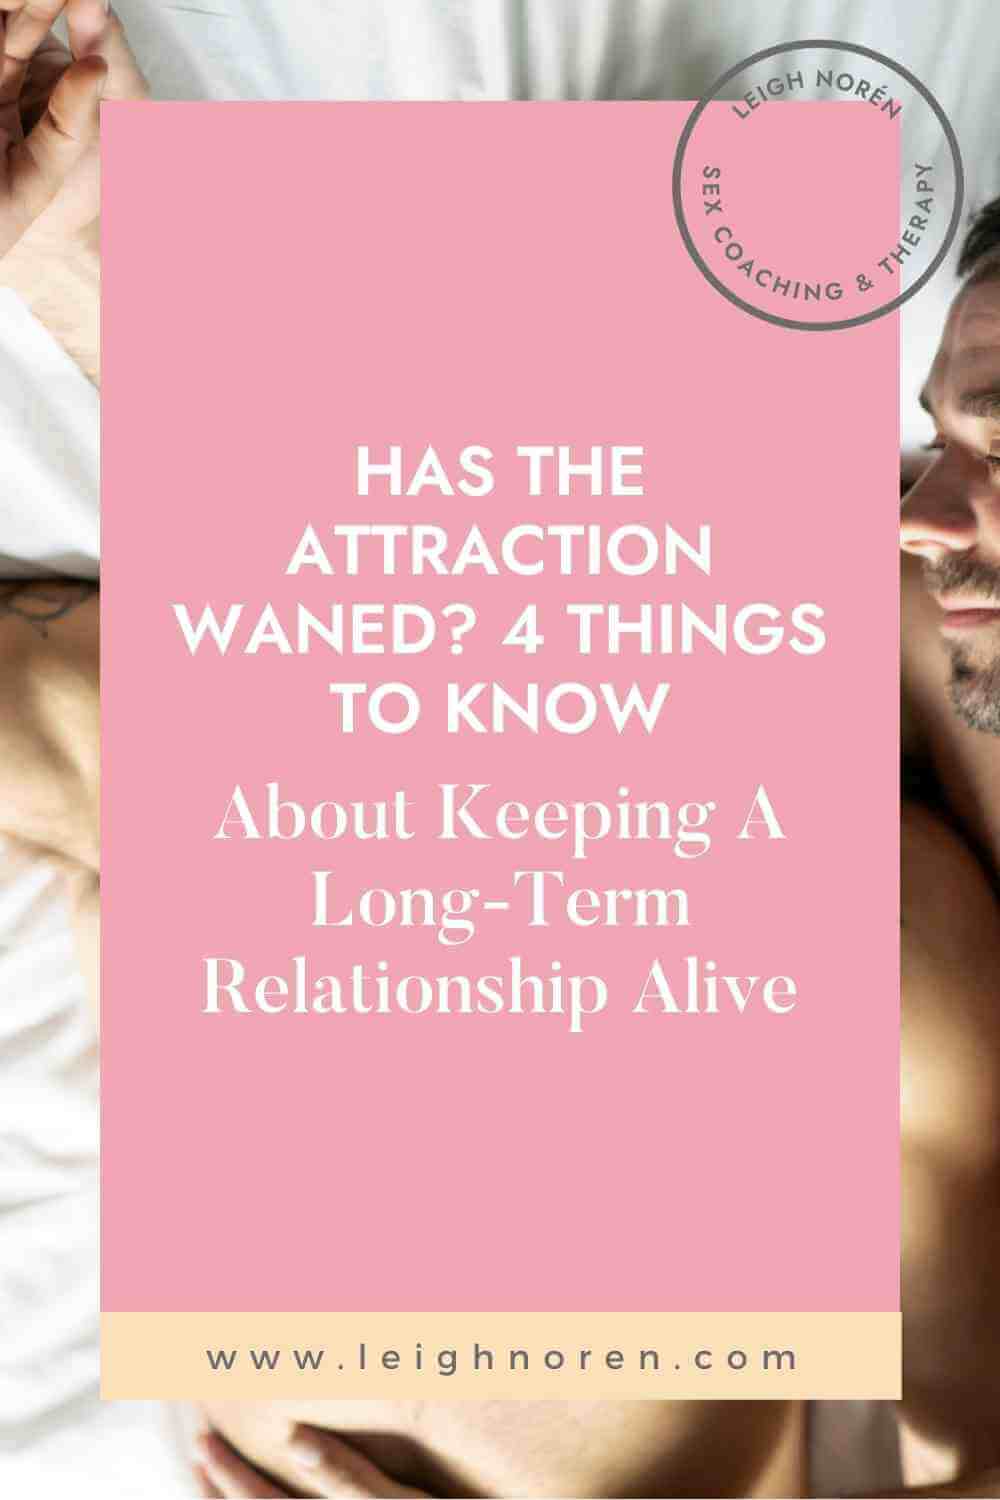 Has The Attraction Waned? 4 Things To Know About Keeping A Long-Term Relationship Alive